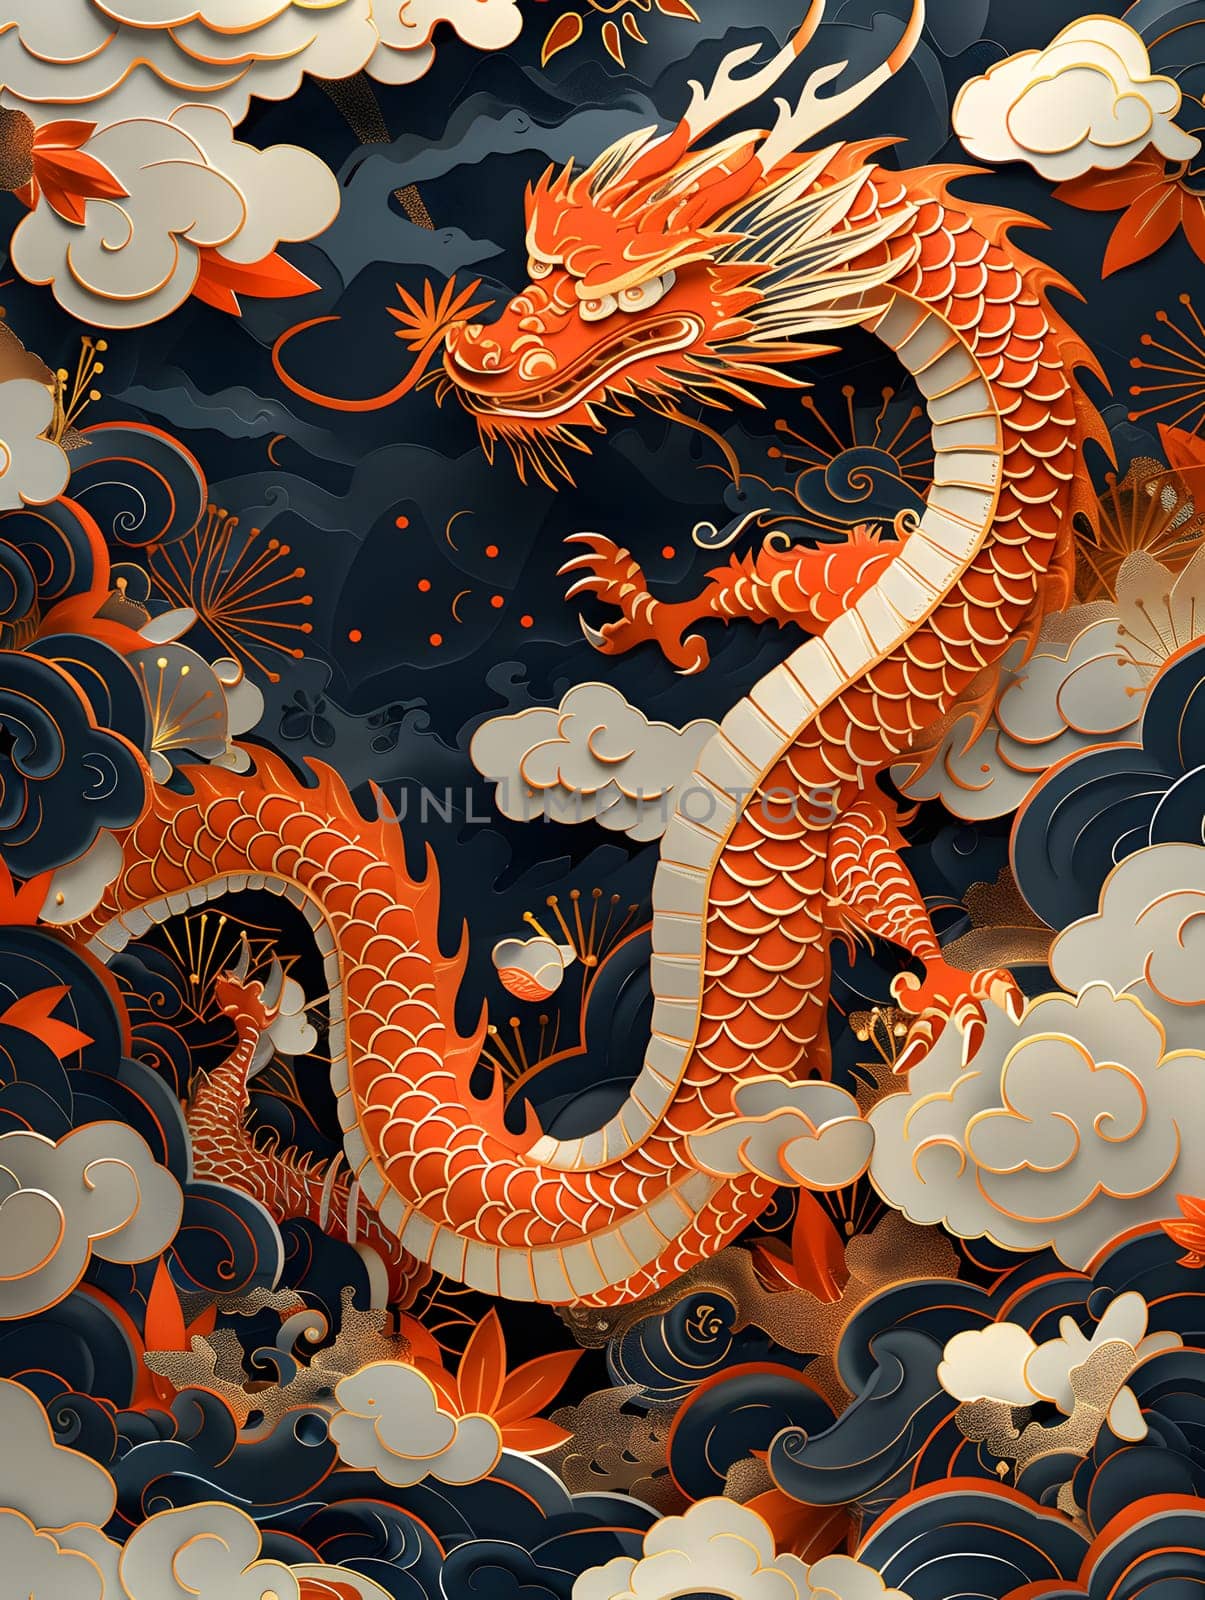 A red dragon surrounded by clouds in a dark Botanyinspired Illustration by Nadtochiy